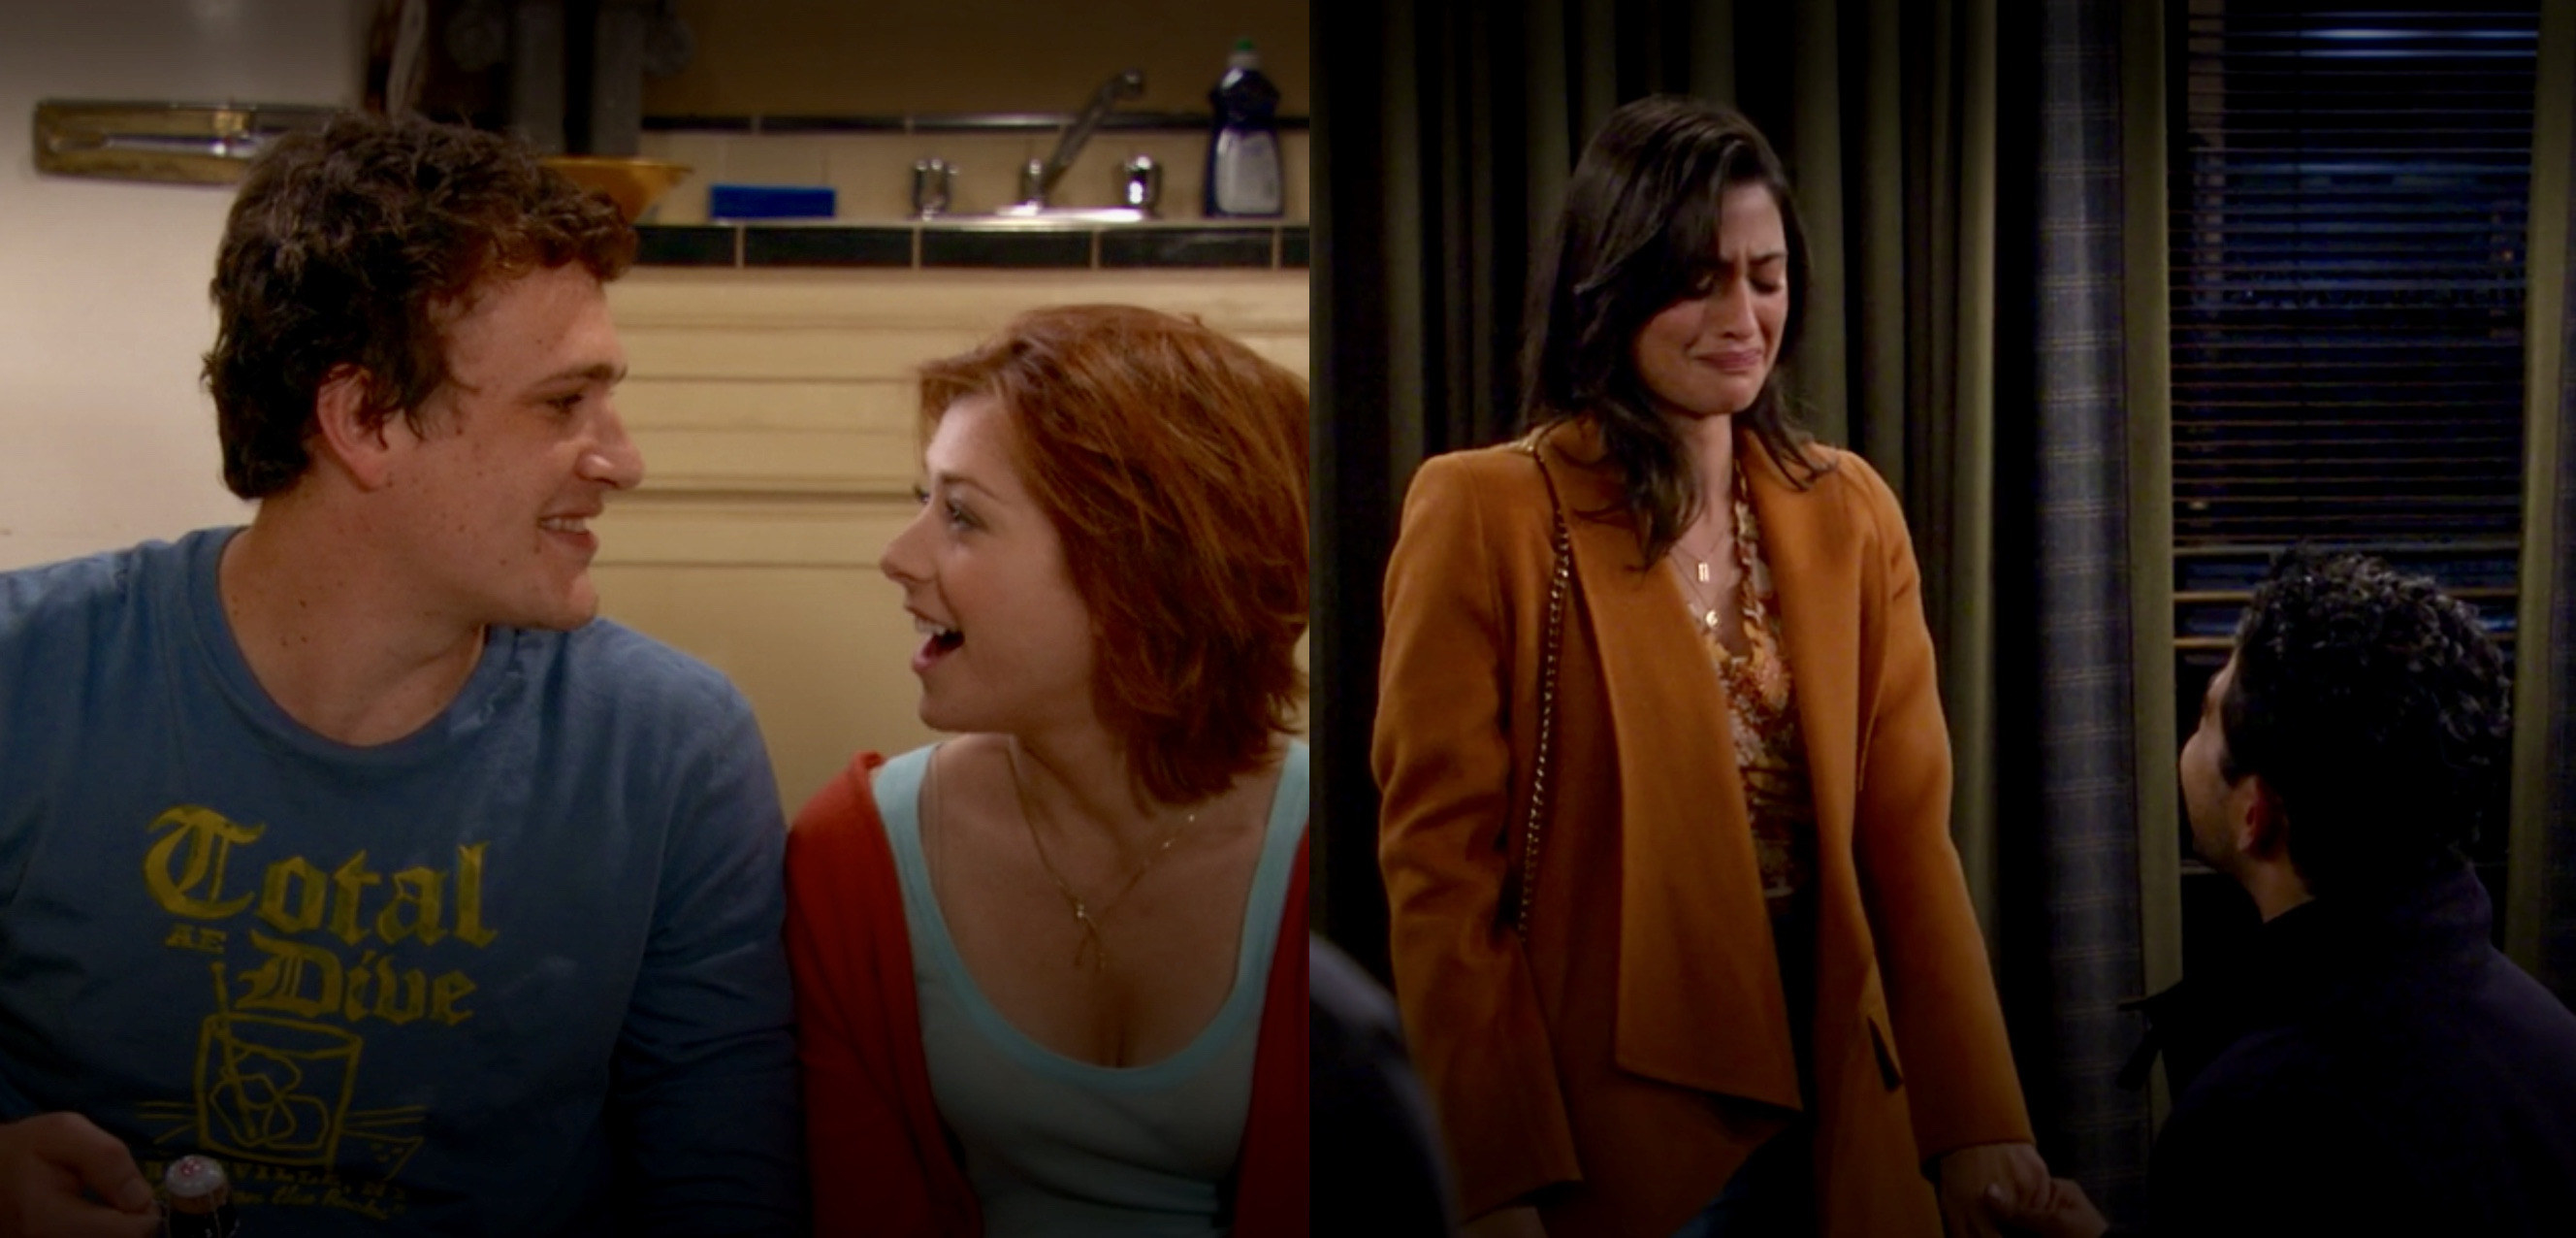 Marshall and Lily (left) and Sid and Hannah (right) getting engaged on their respective shows